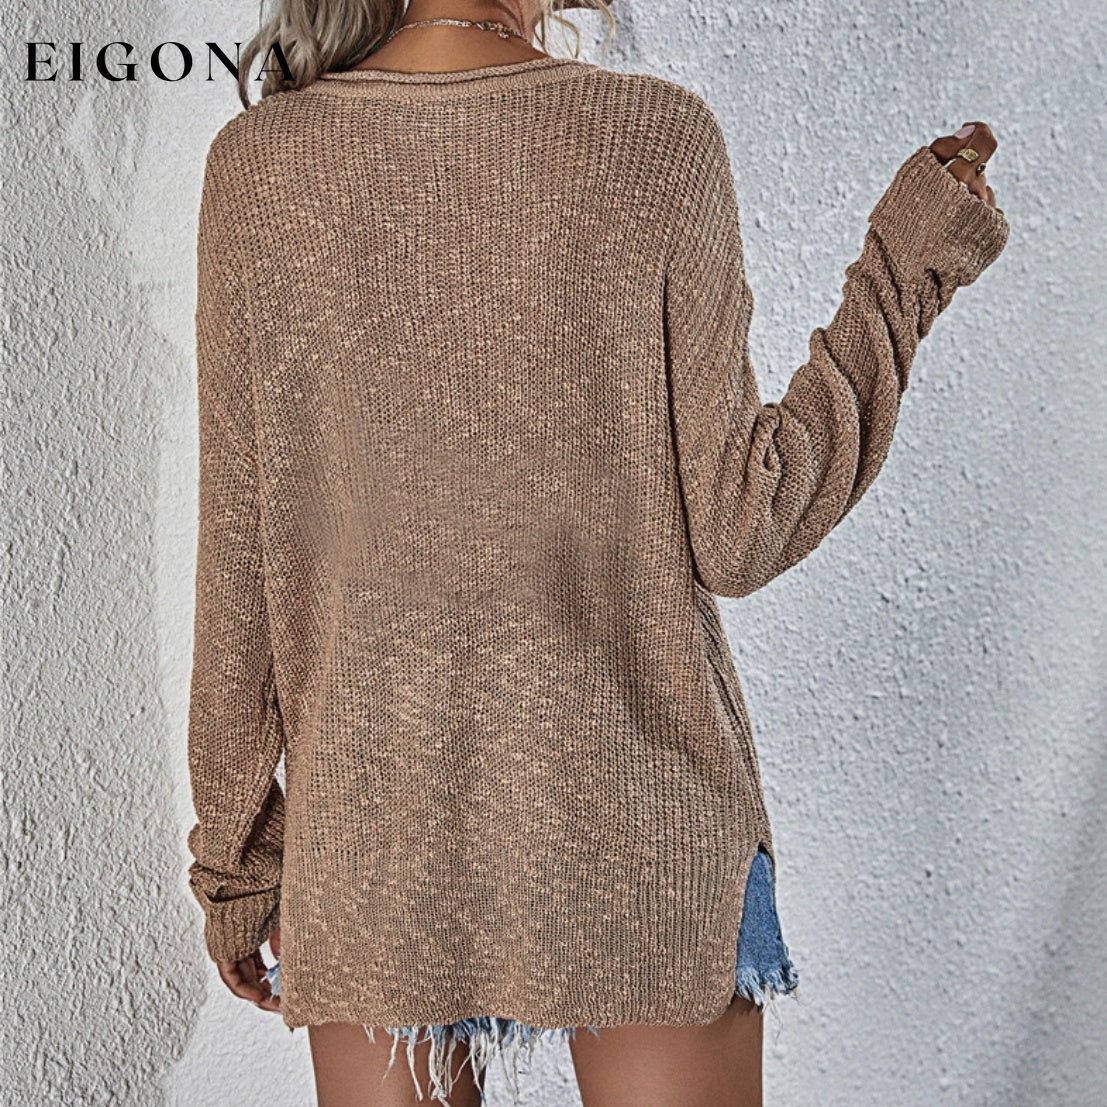 Notched Neck Slit Knit Top clothes J&Q long sleeve shirt long sleeve shirts long sleeve top long sleeve tops Ship From Overseas Shipping Delay 09/29/2023 - 10/04/2023 shirt shirts top tops